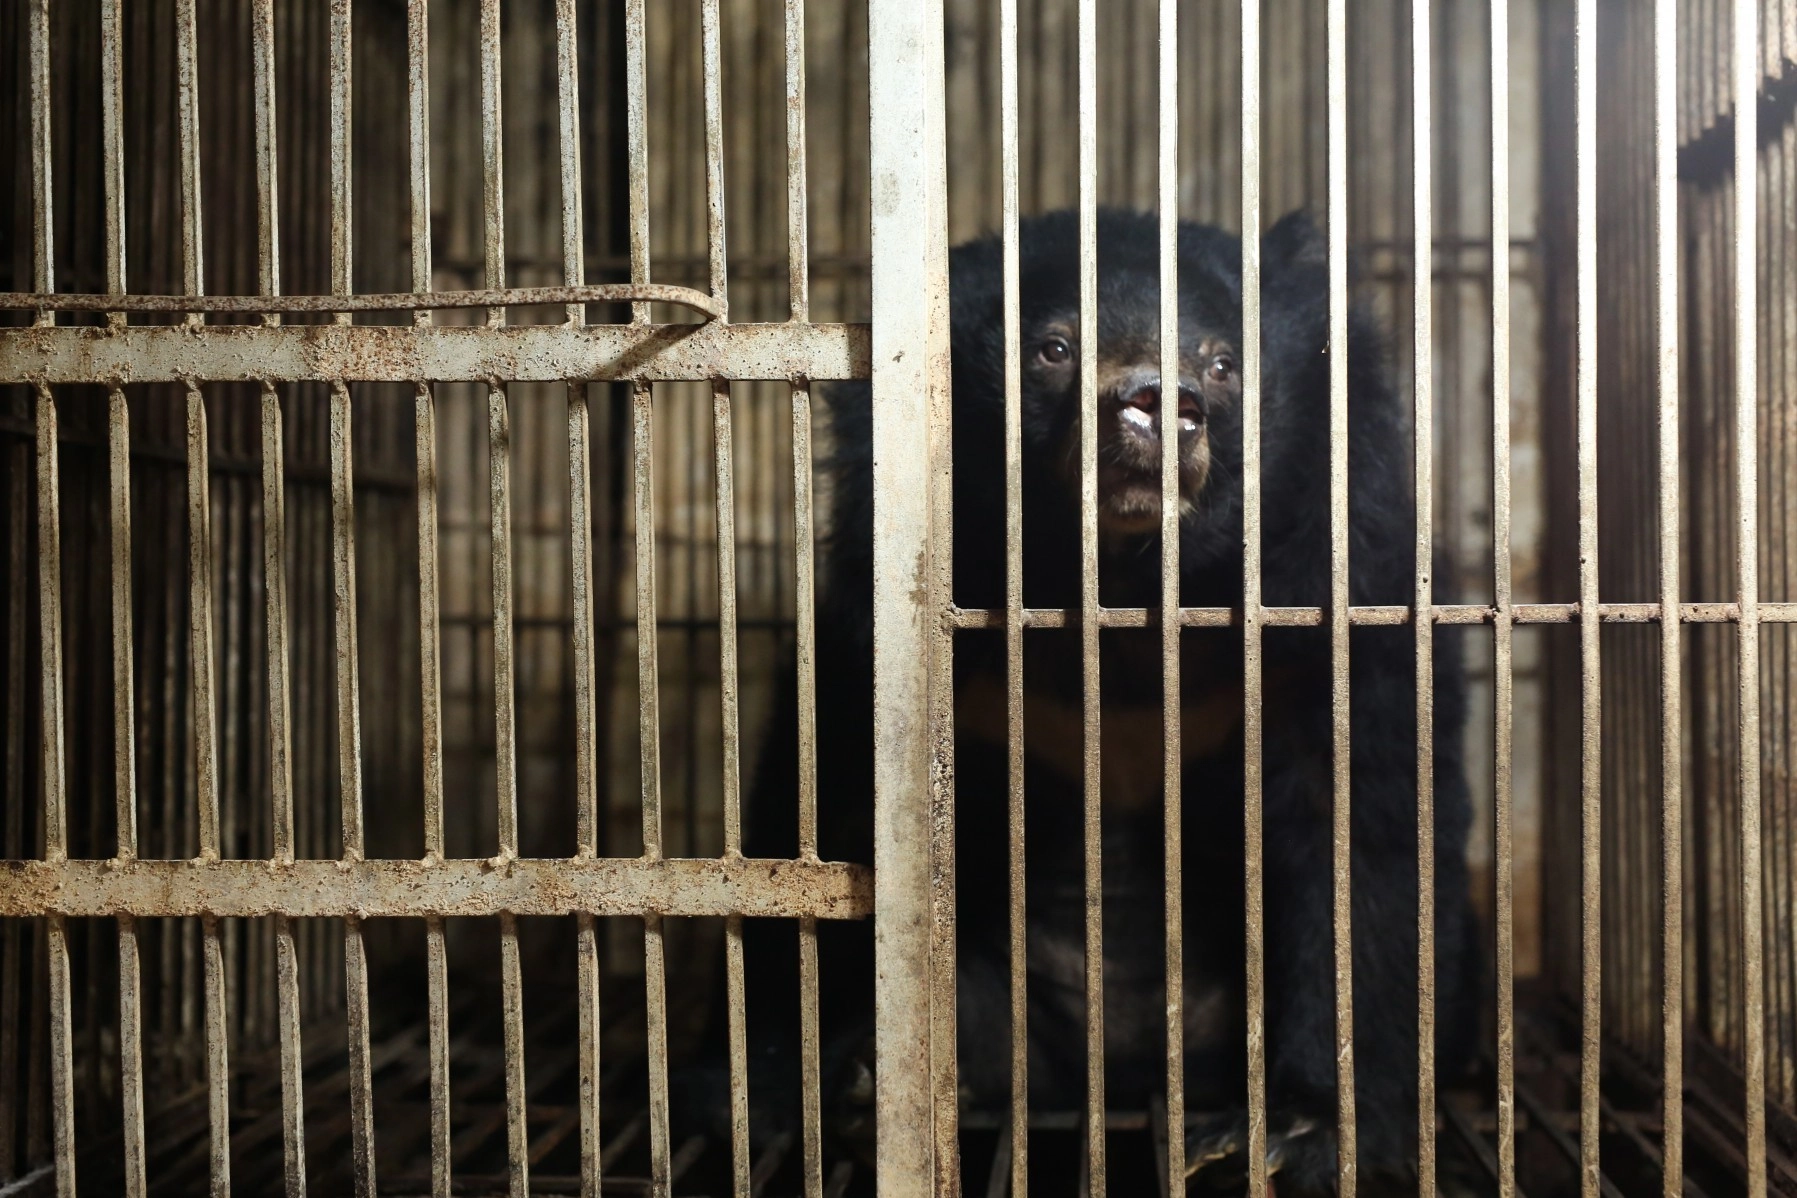 A bear in Vietnam behind cage bars. This bear was rescued by World Animal Protection and Animals Asia.